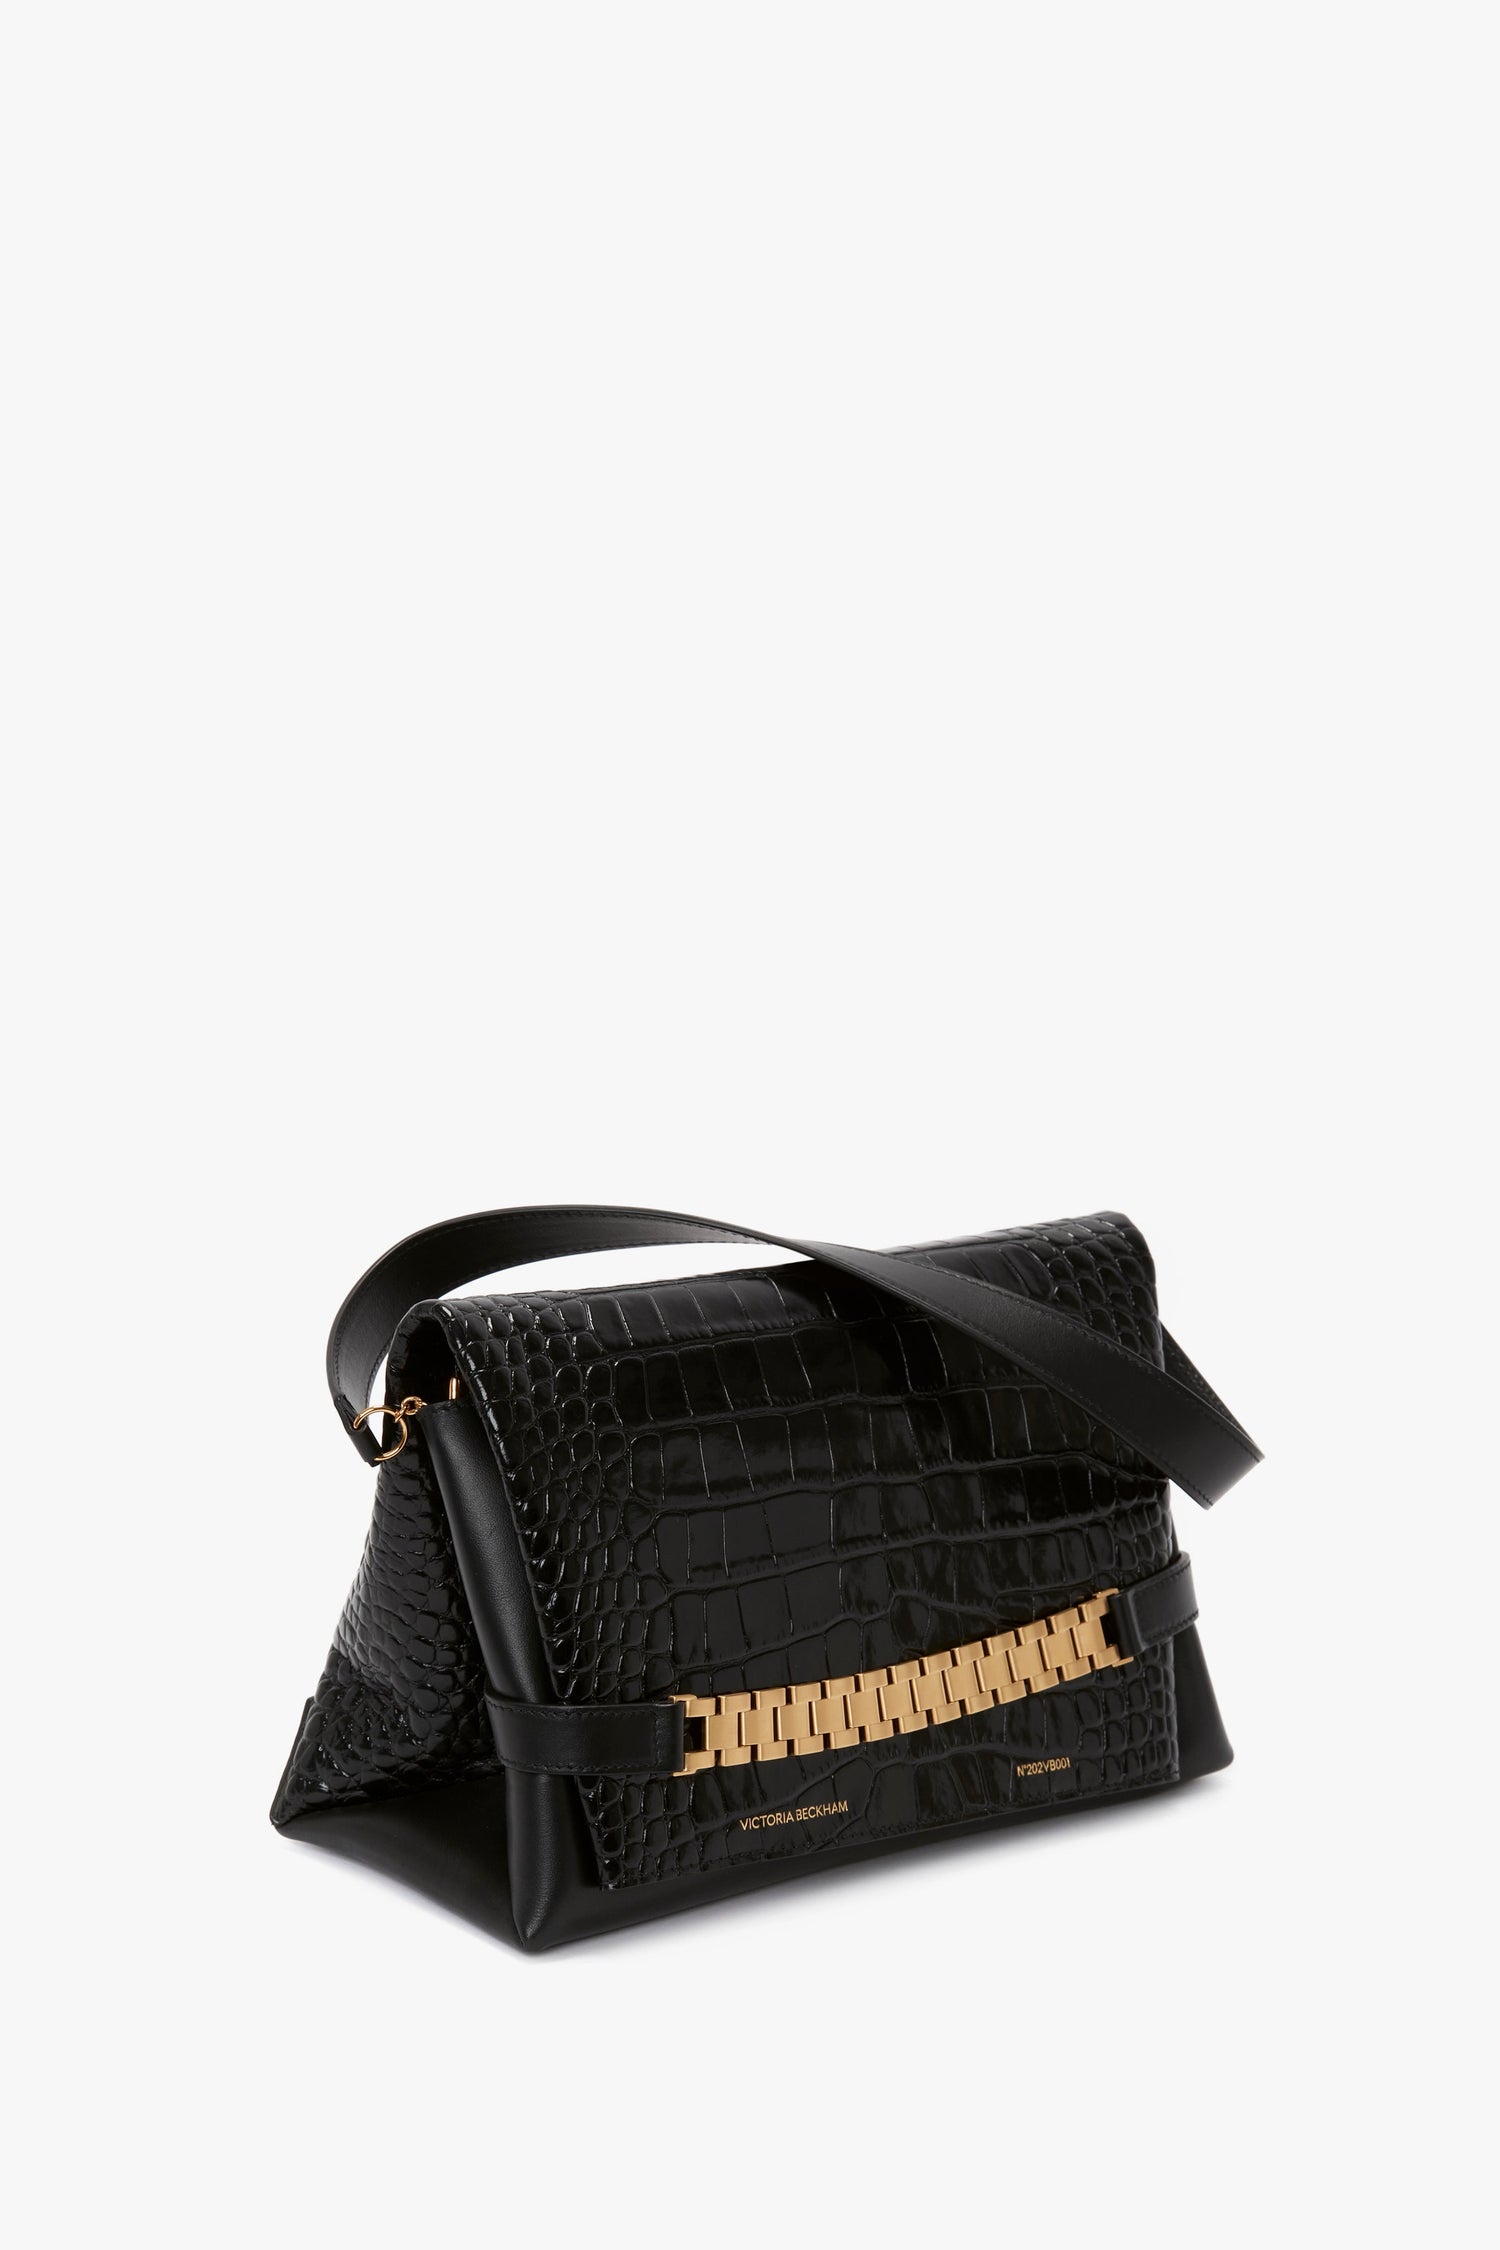 Croc-Embossed Sling Bag with Chain Strap